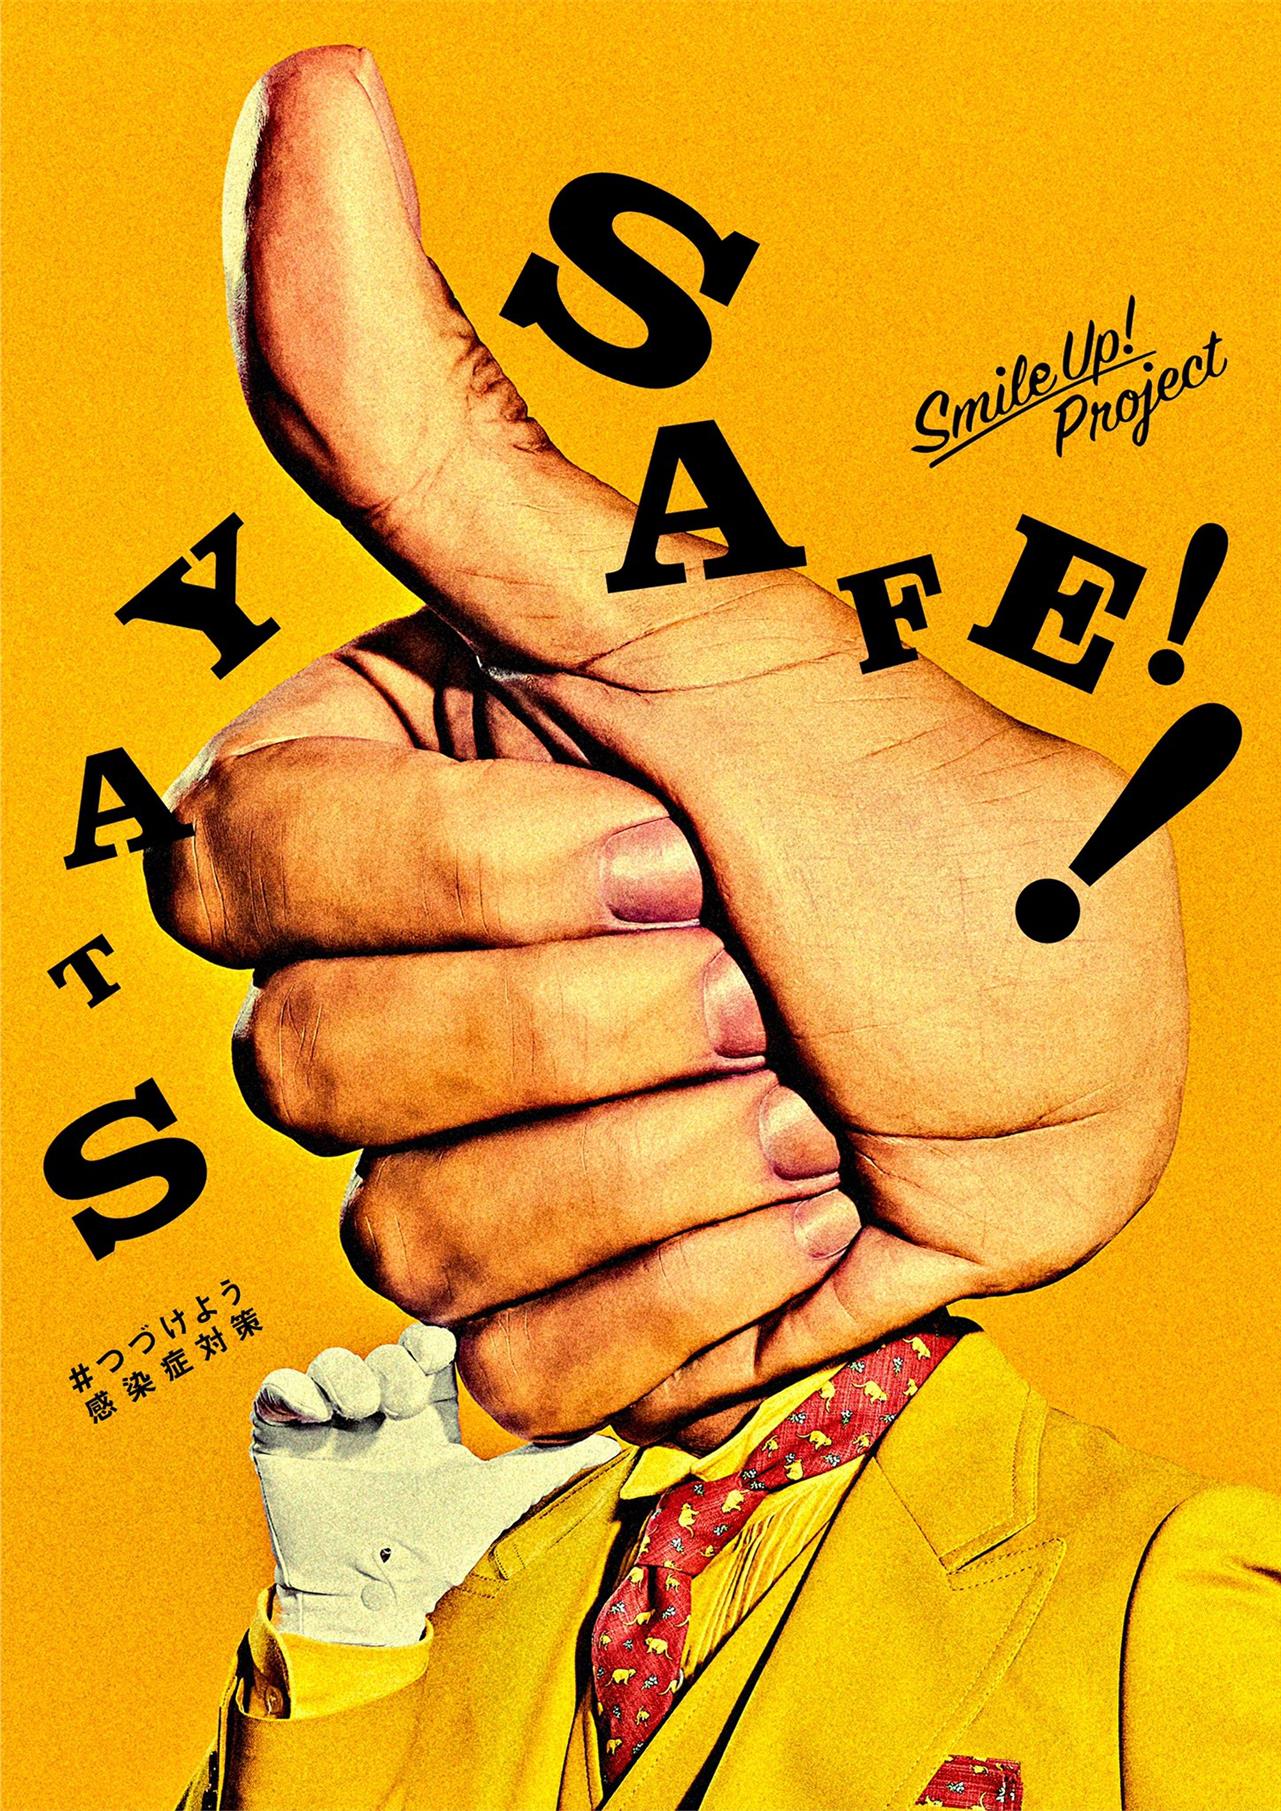 ✩STAY SAEF!!✩